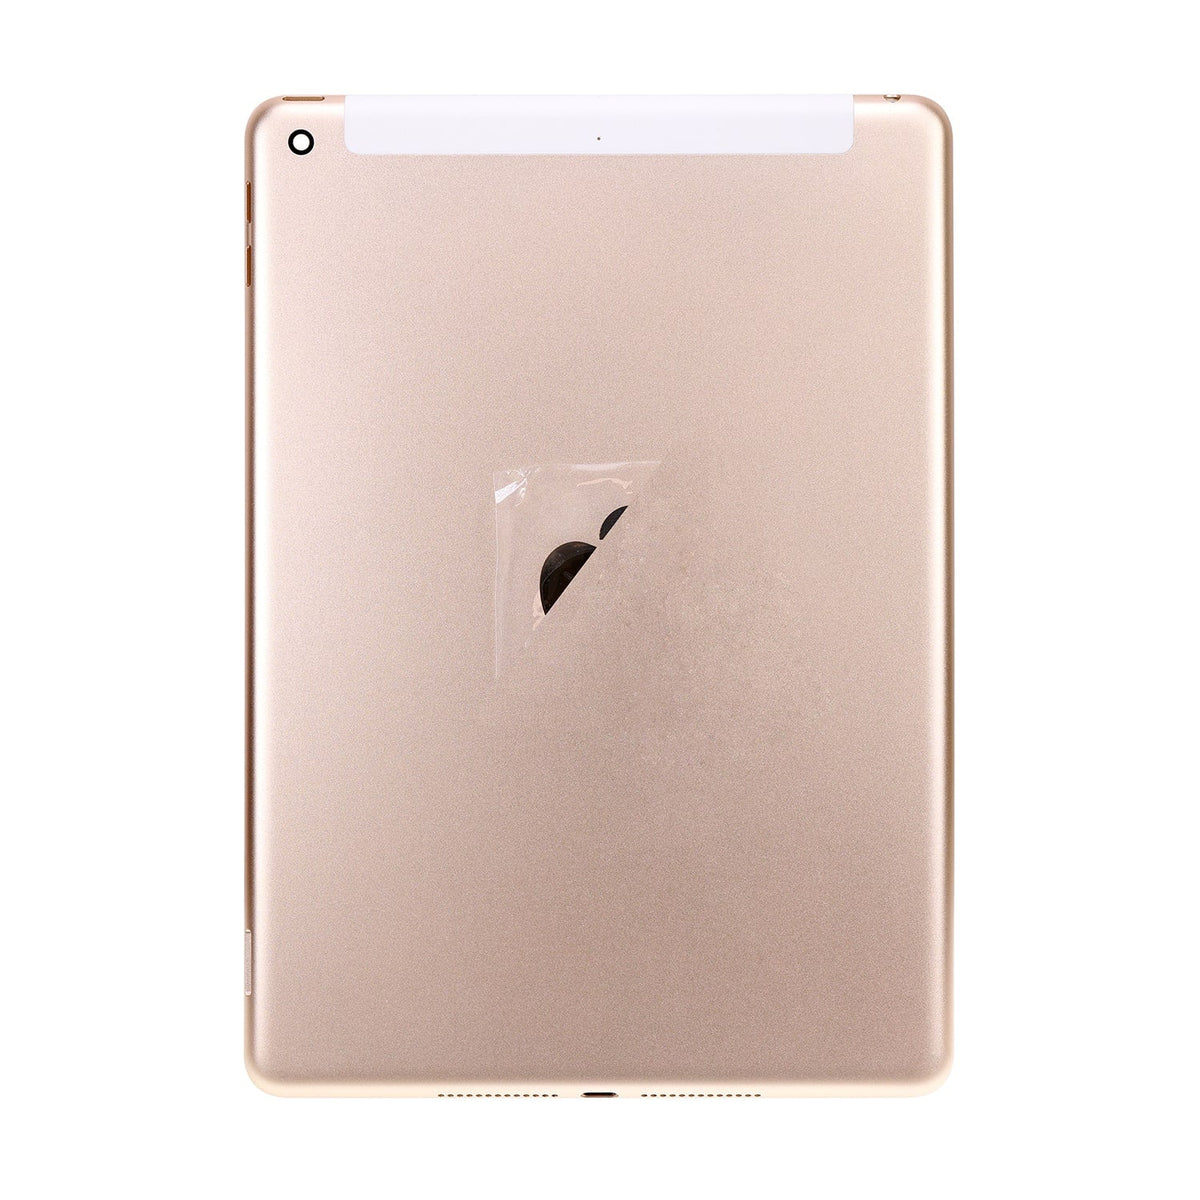 GOLD BACK COVER (4G VERSION) FOR IPAD 5